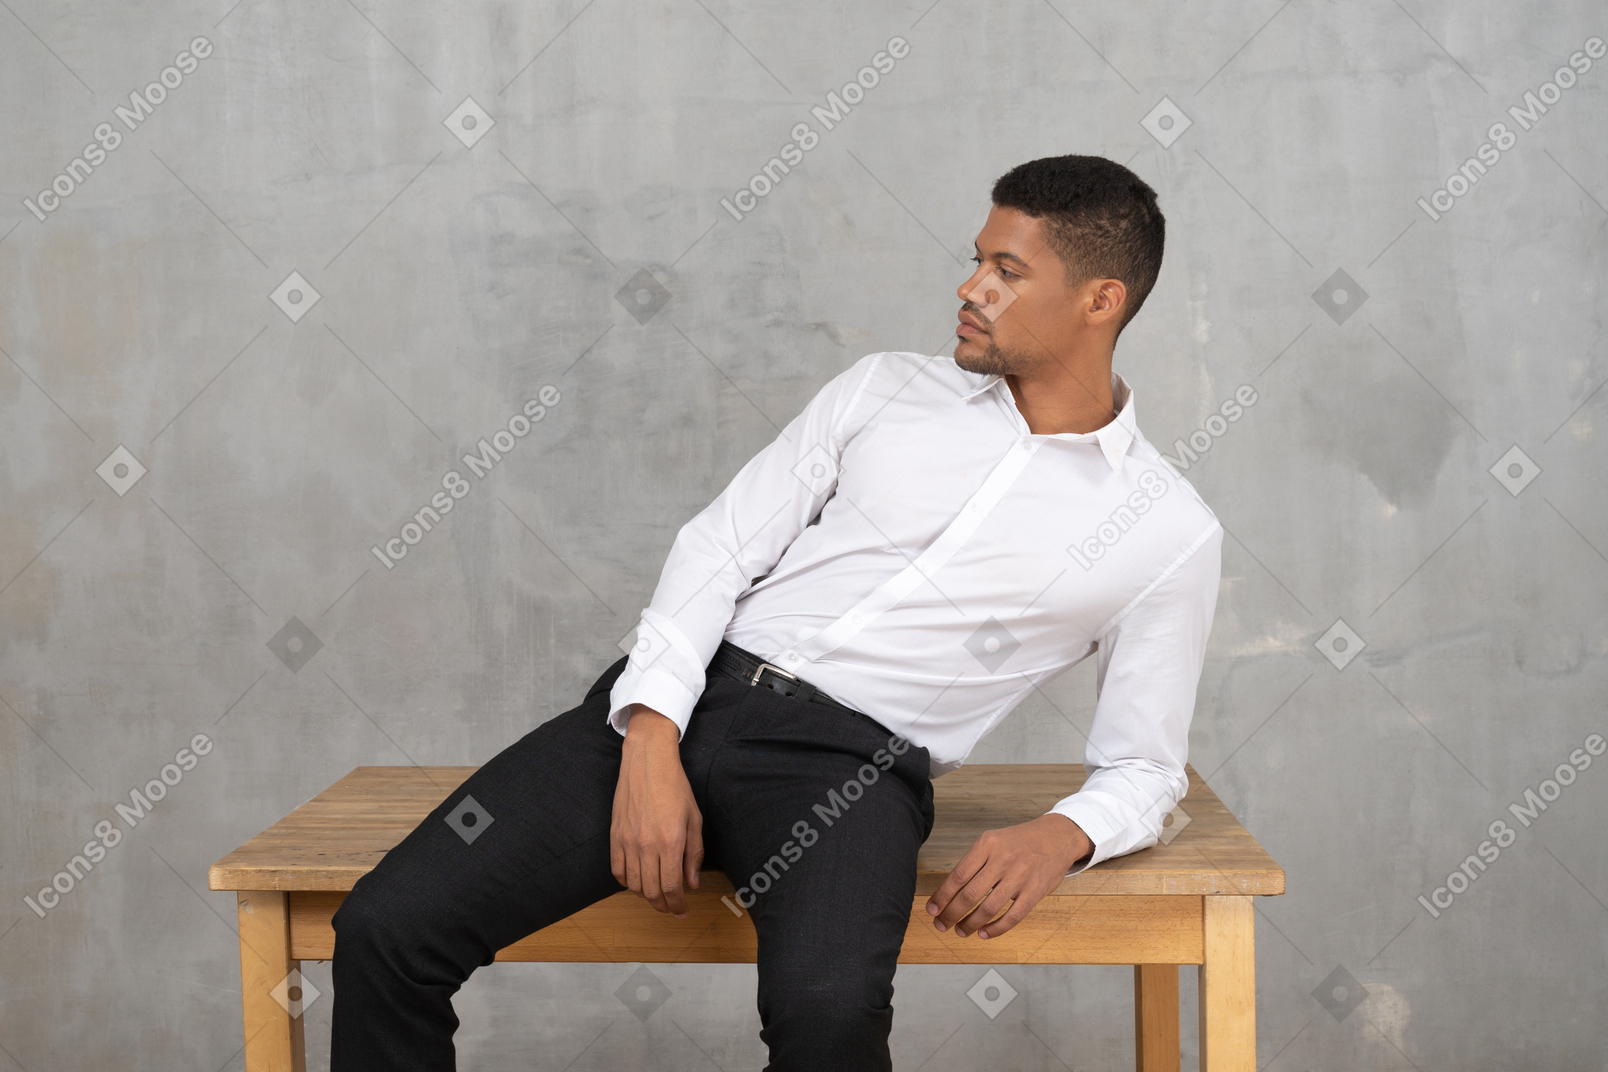 Relaxed man in office clothes sitting on a table